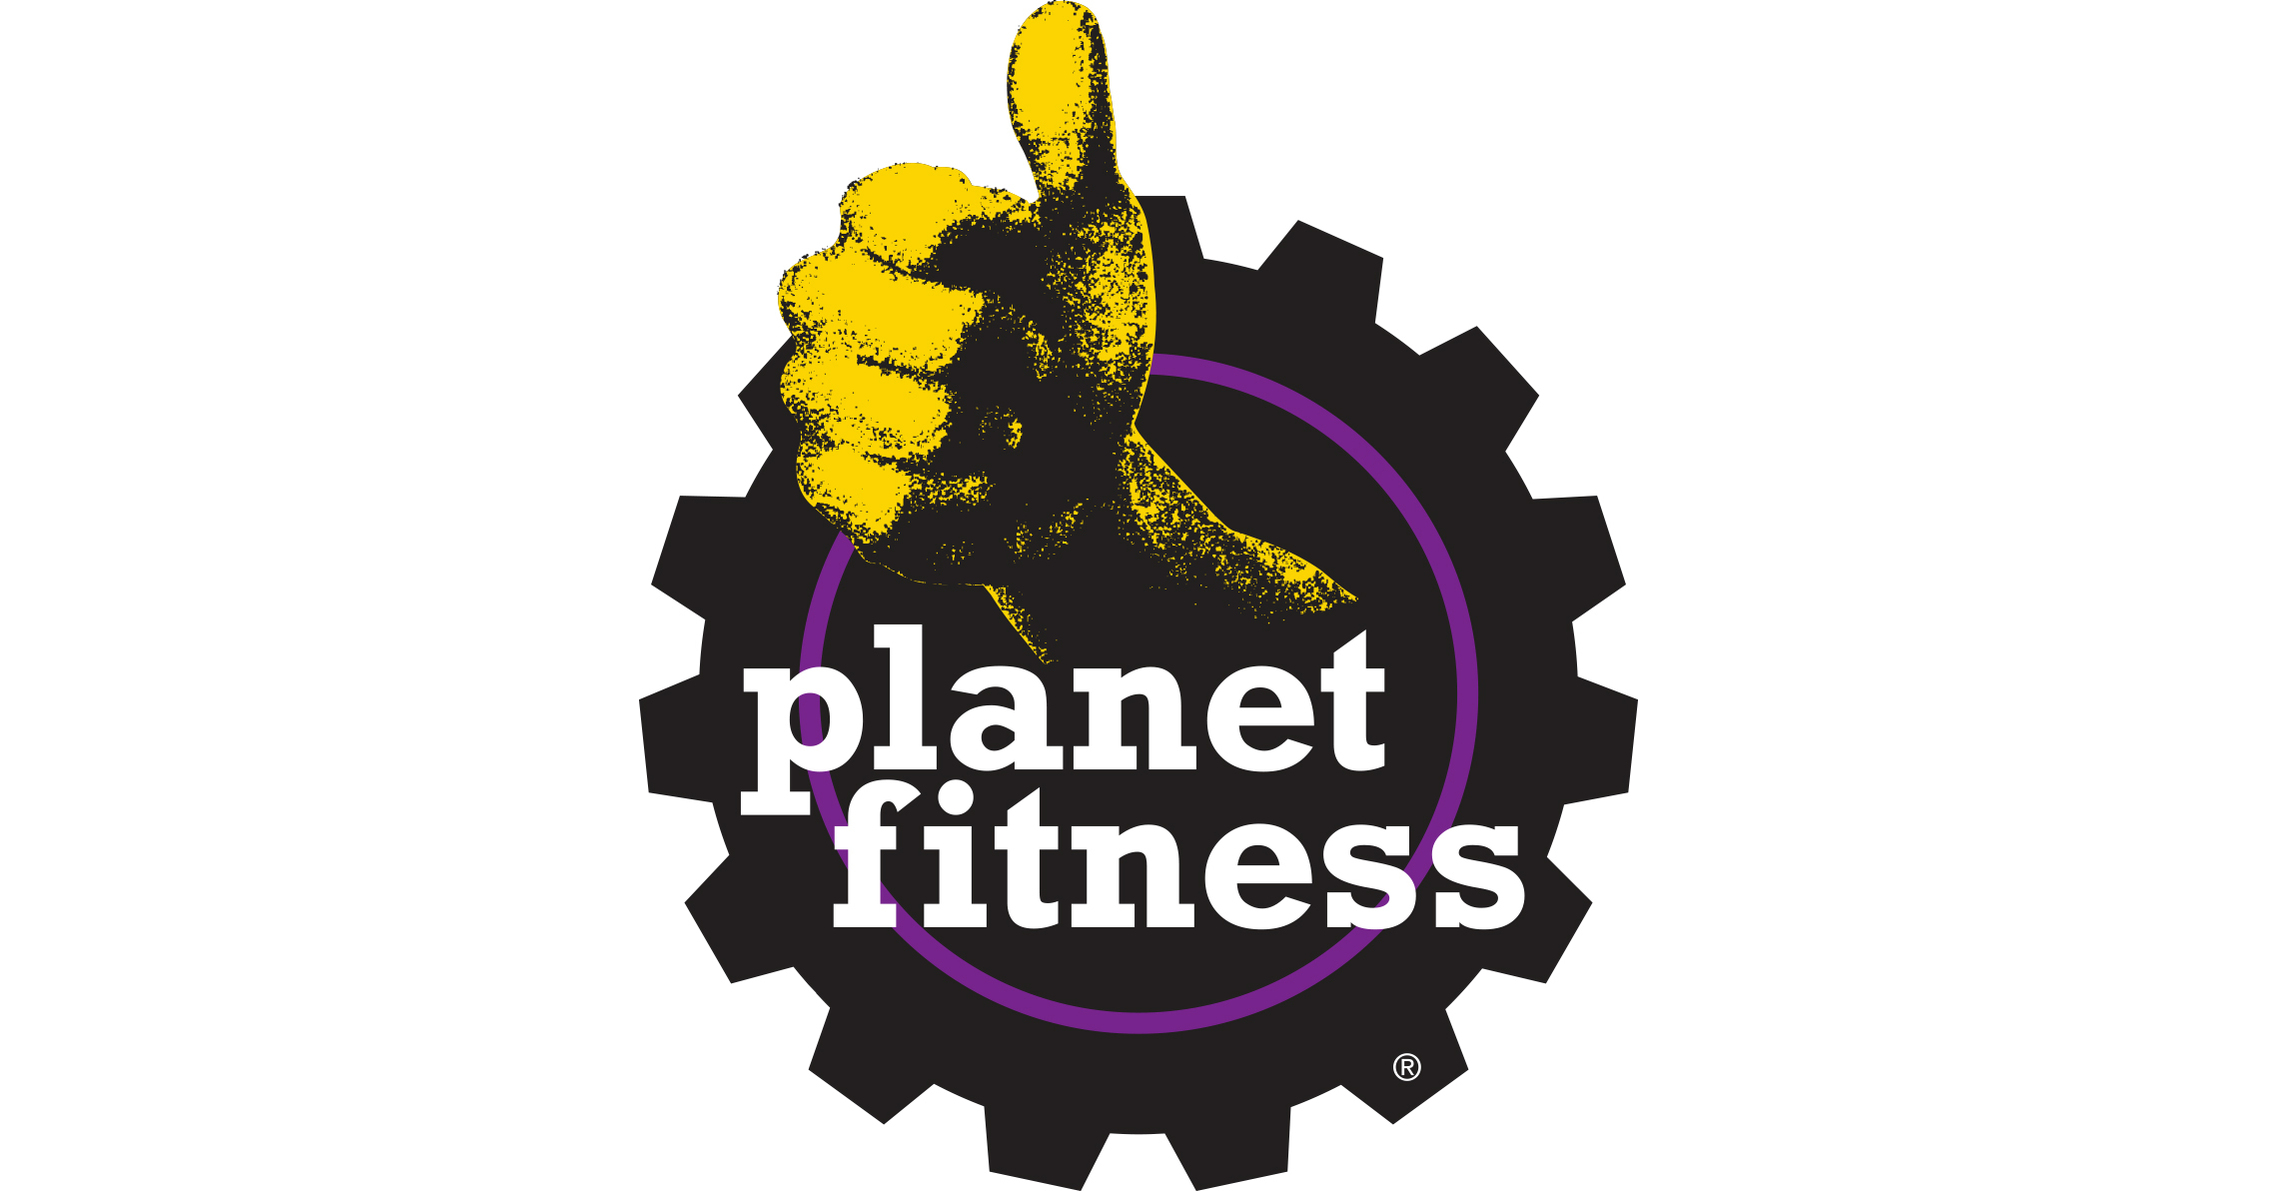 PLANET FITNESS ANNOUNCES RETURN AS PRESENTING SPONSOR OF NEW YEAR'S EVE  CELEBRATION IN TIMES SQUARE